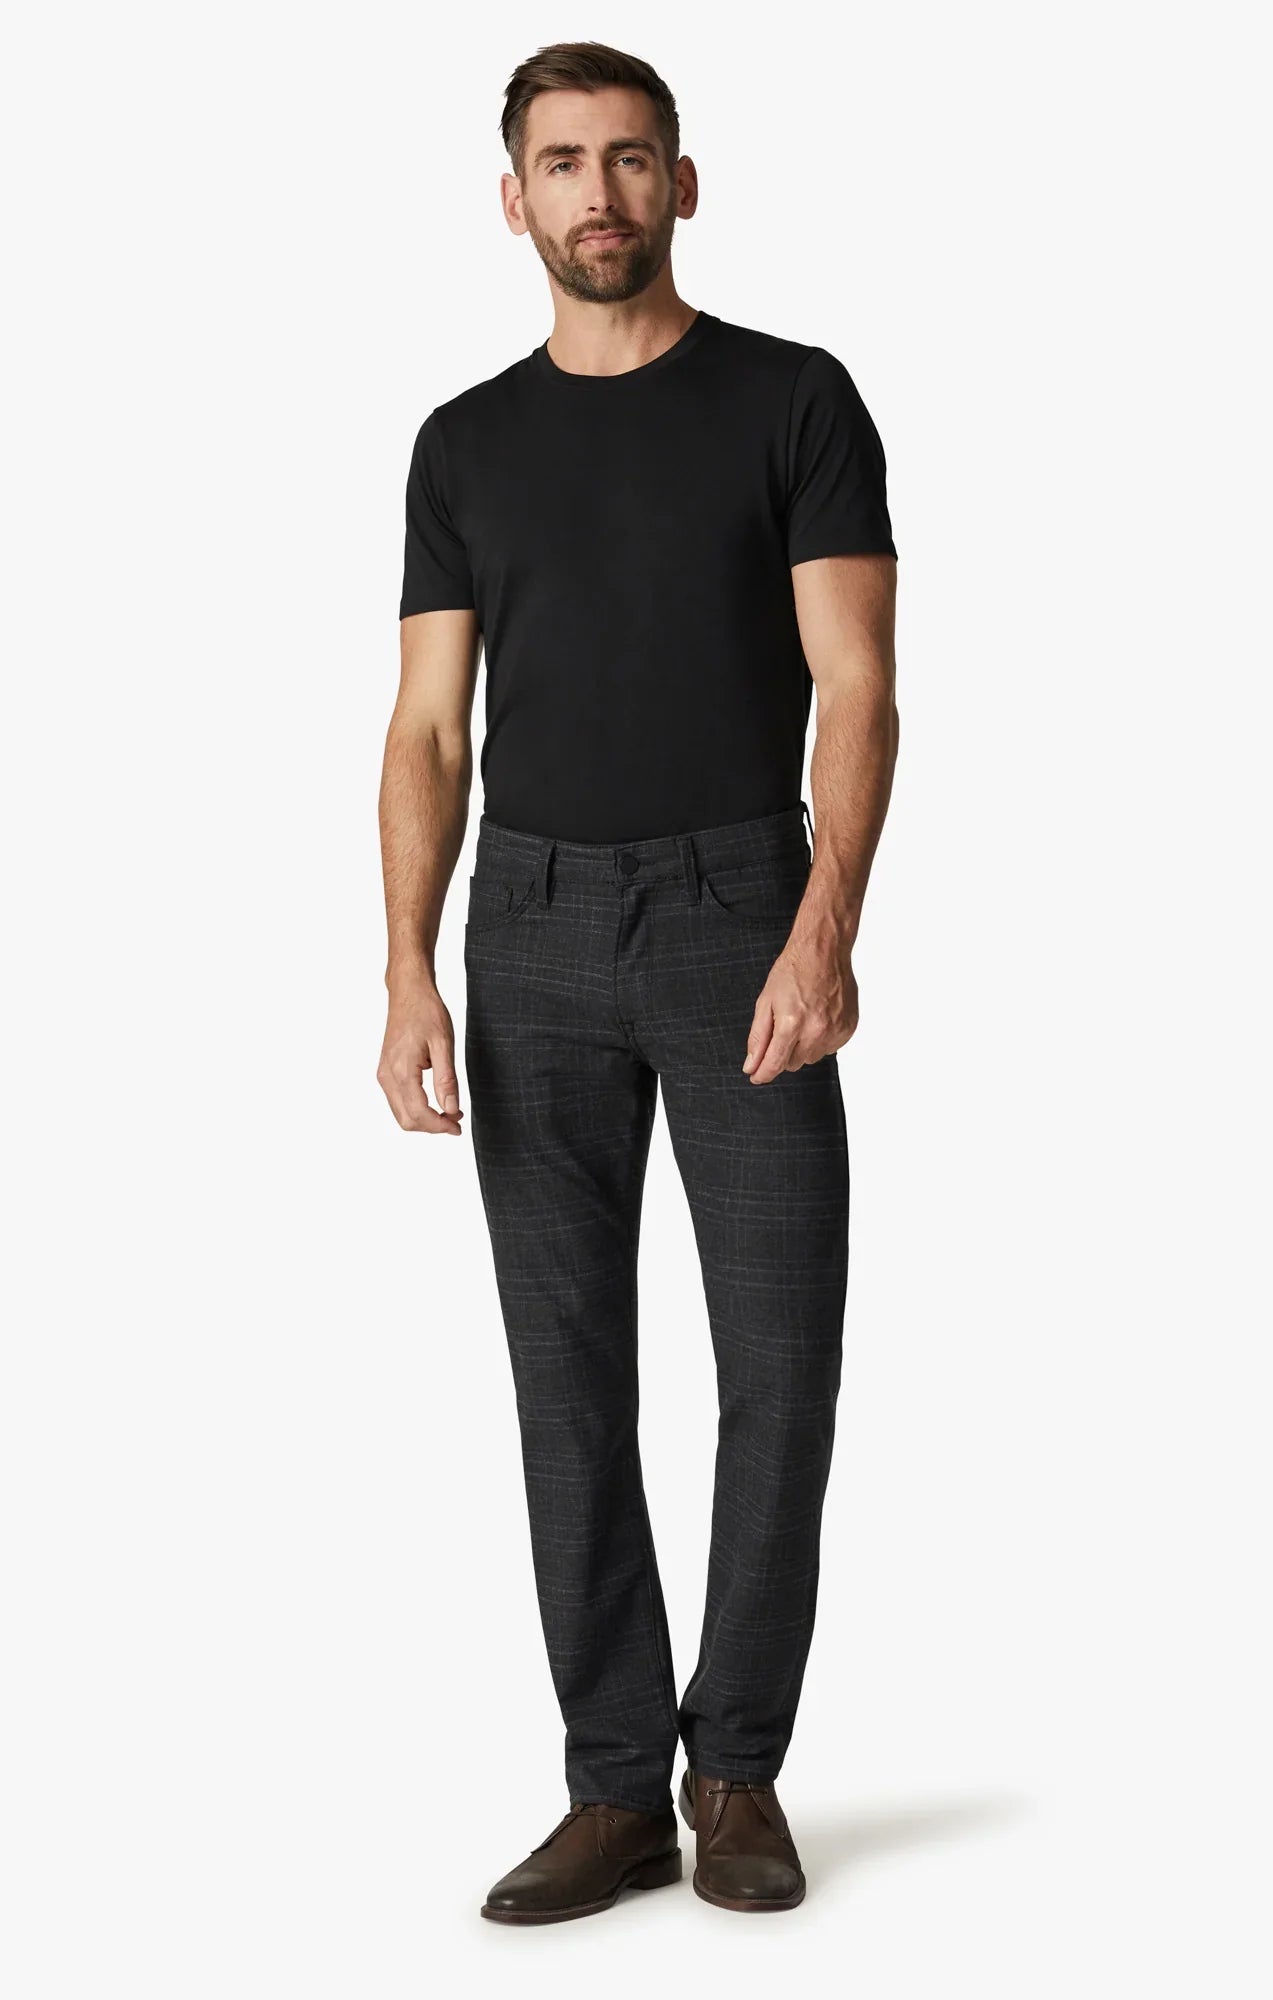 34 Heritage - Courage Grey Checked - Pants-Men&#39;s Pants-Yaletown-Vancouver-Surrey-Canada